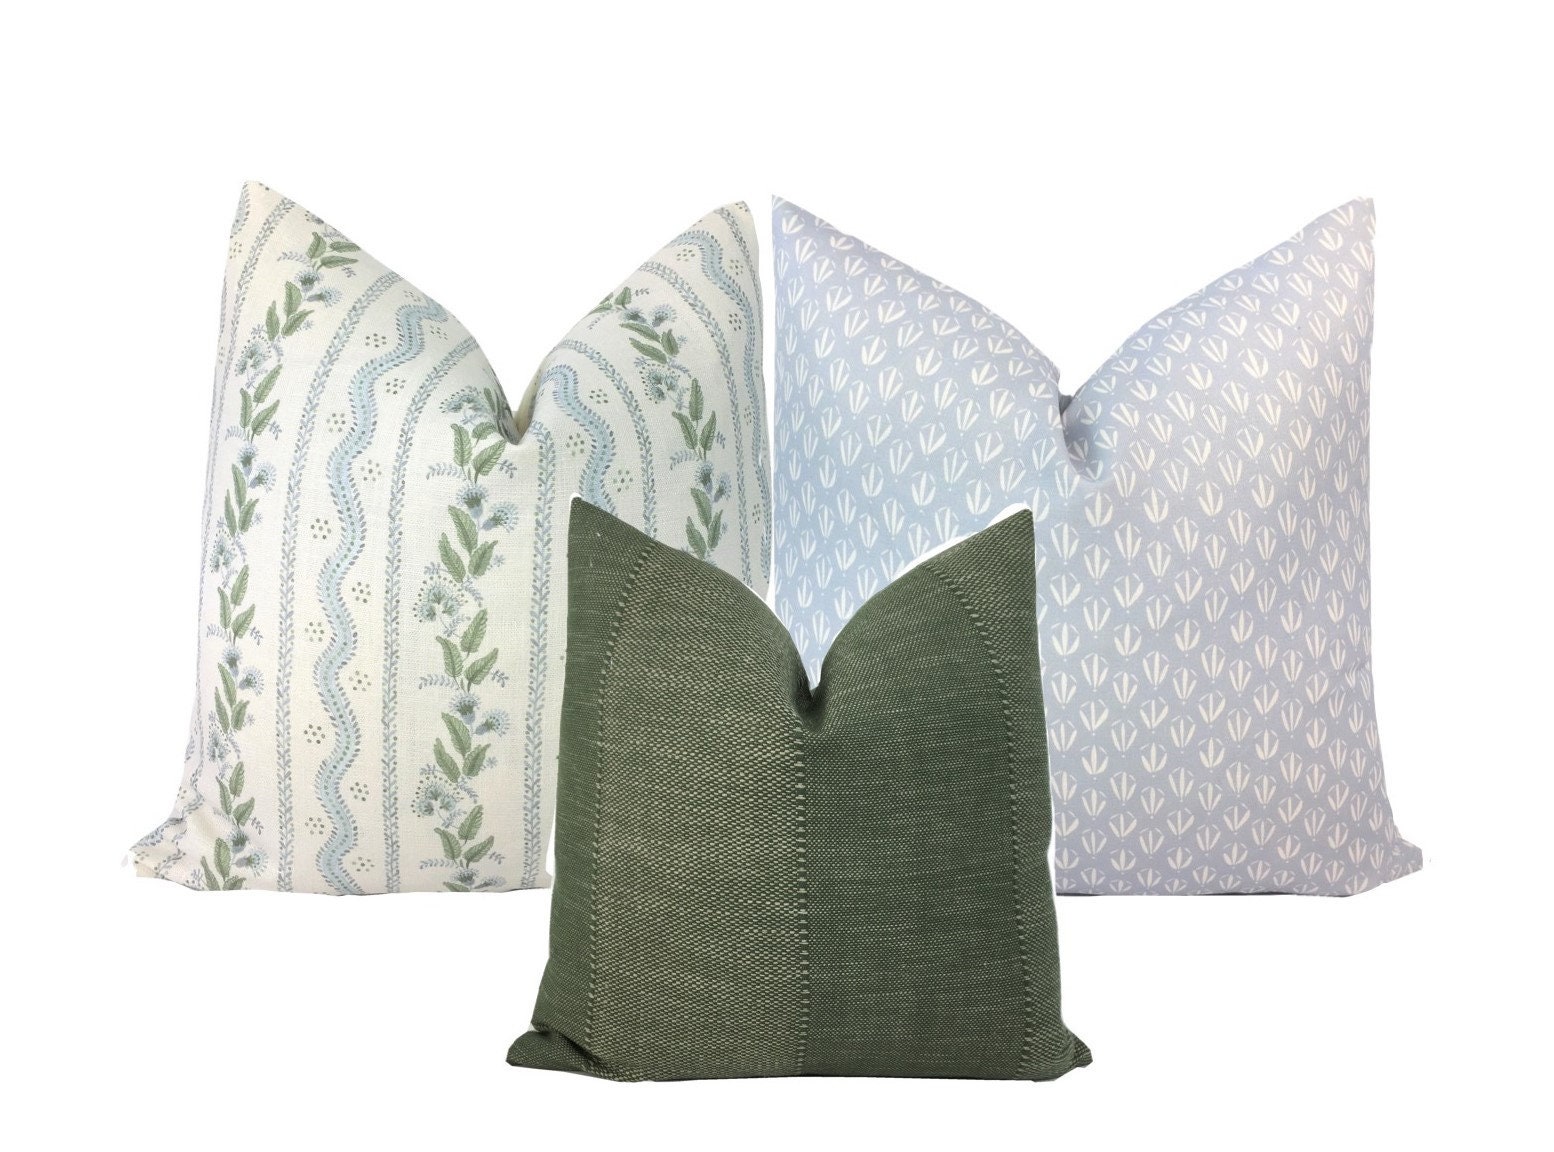 New multi green throw pillows. Beautiful for any part of your